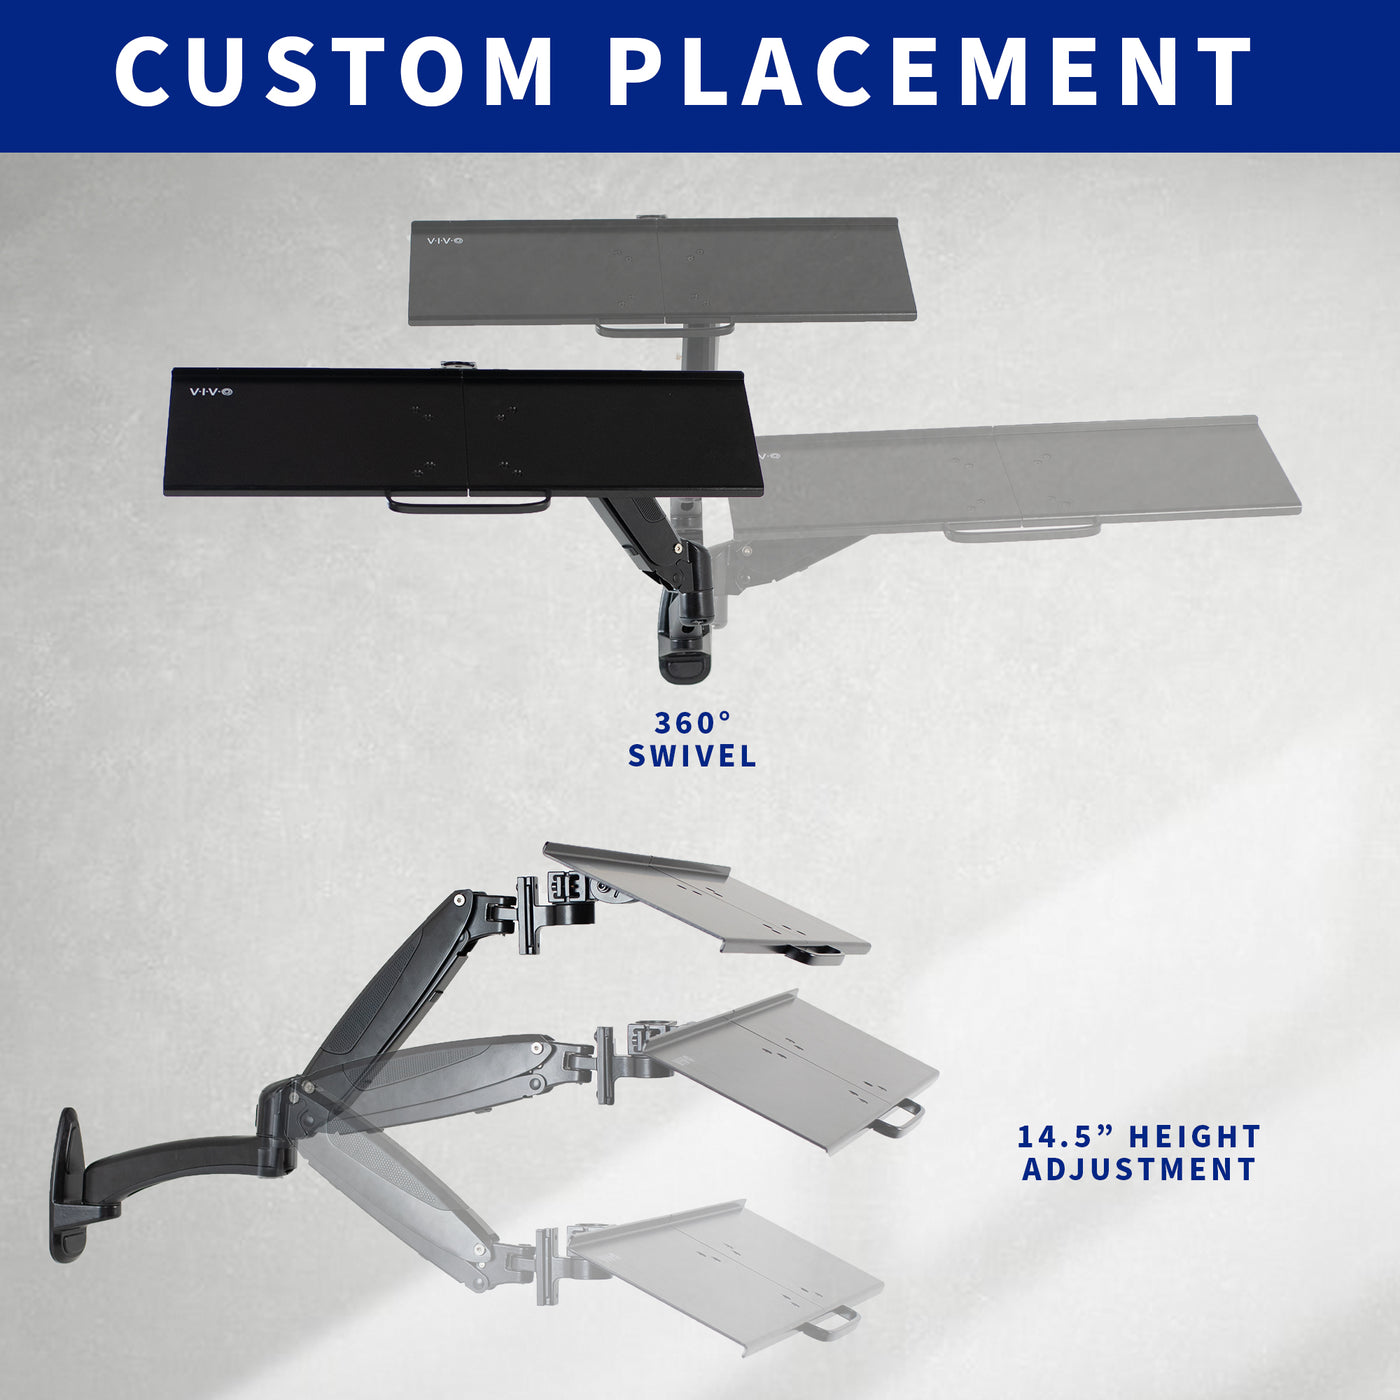 Three-sixty swivel and height adjustment and extension of keyboard tray arm.